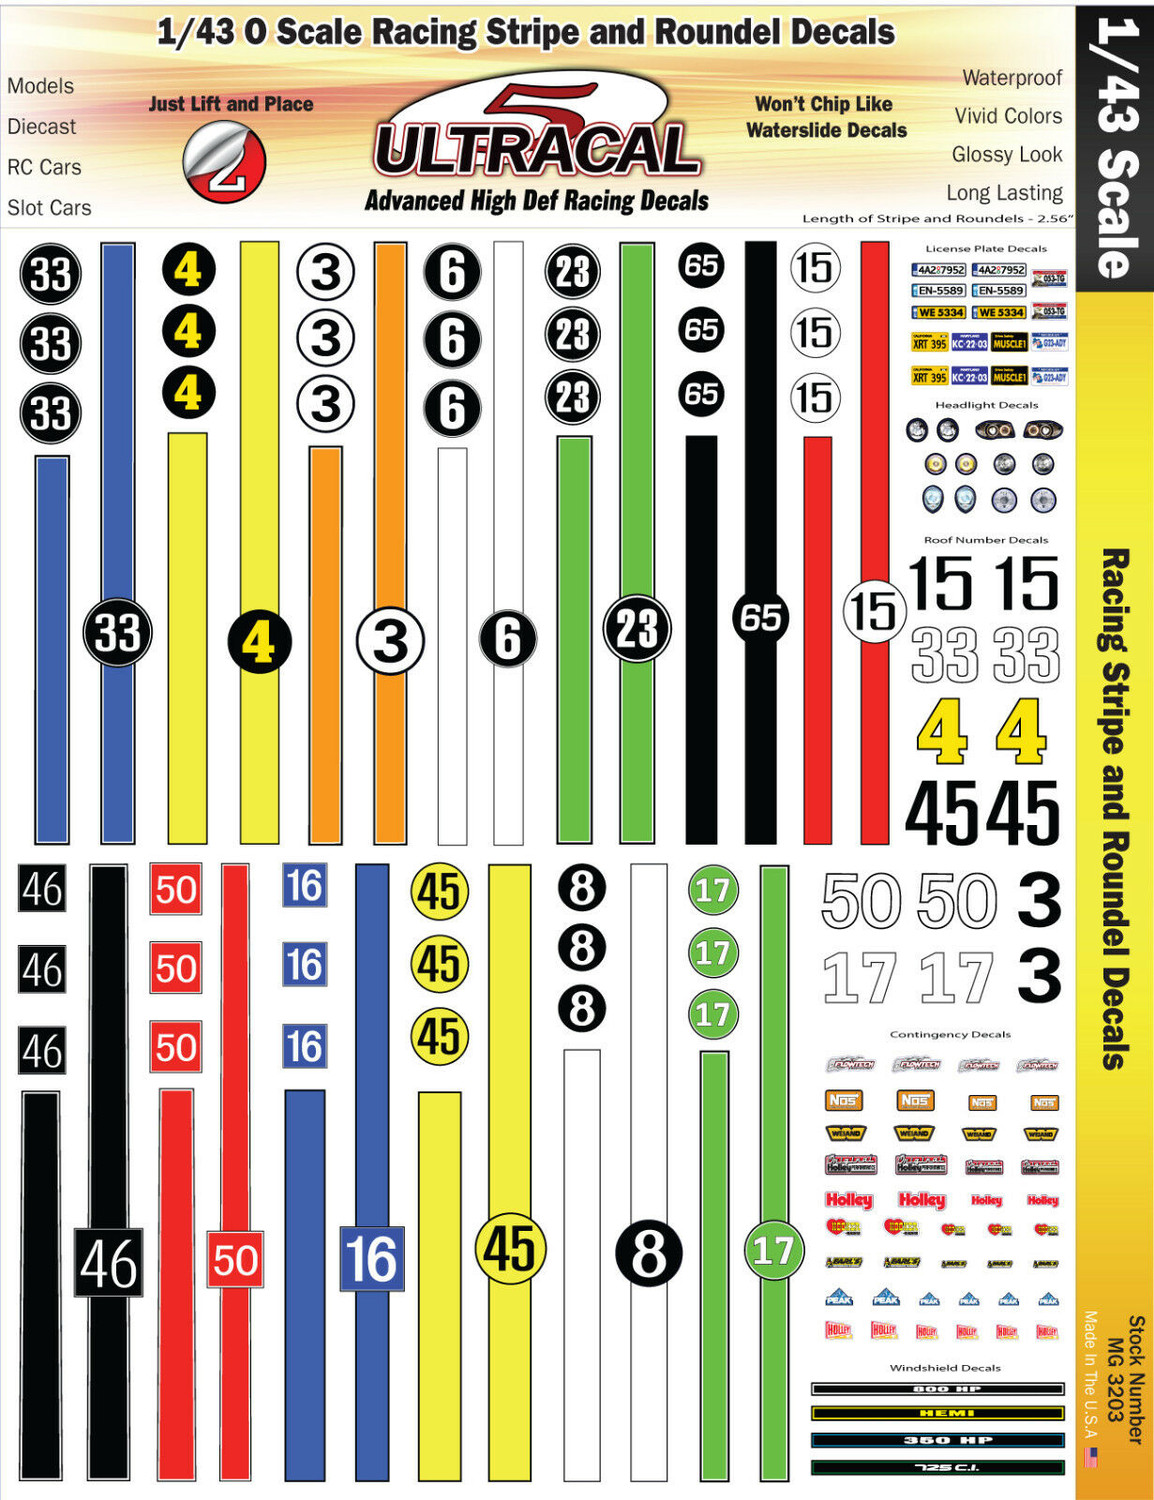 MG 3203 Ultracal Racing Stripes and Roundel Decals 1:43 Scale